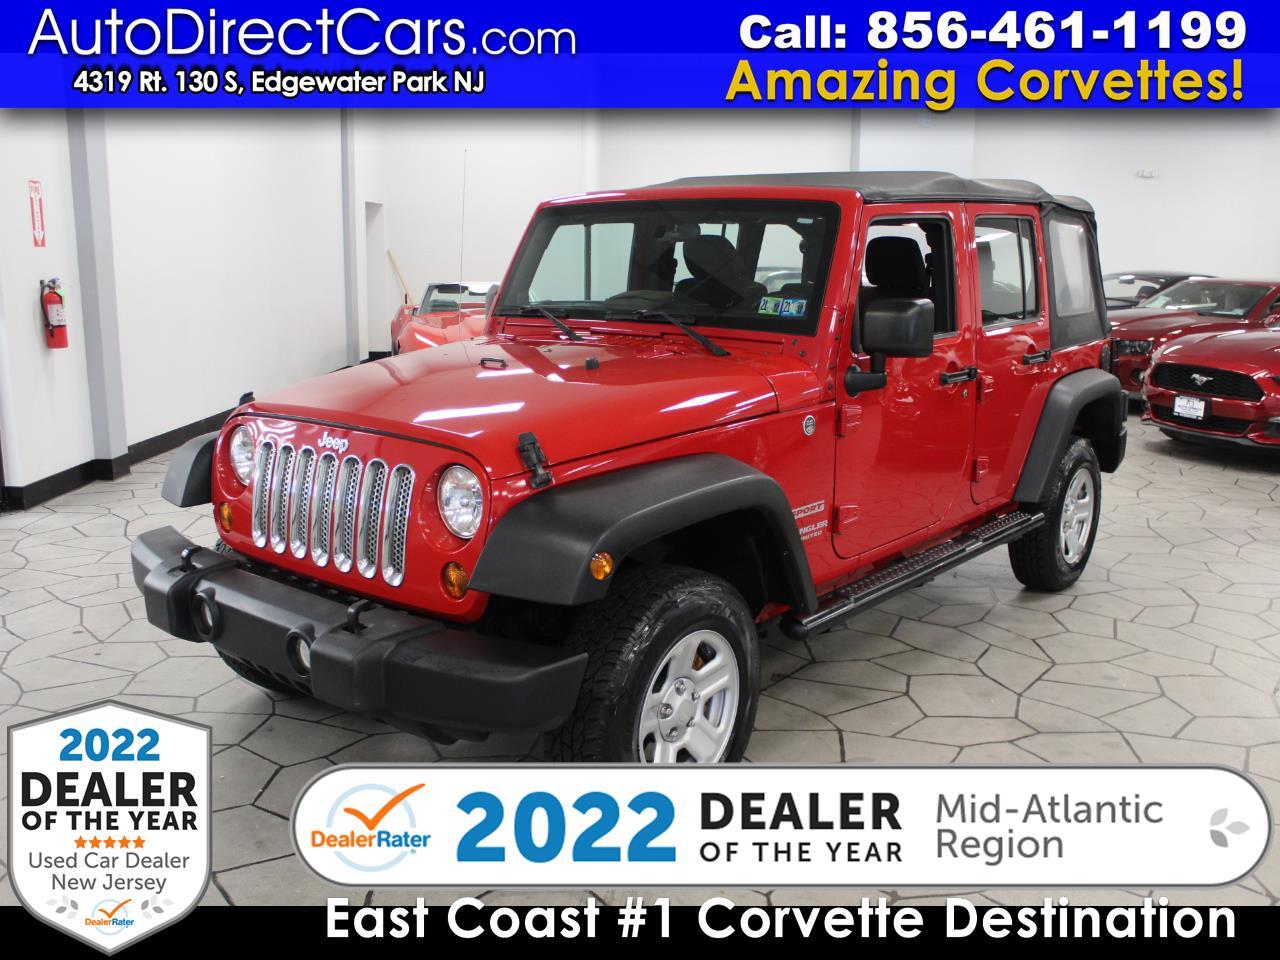 Used 2012 Jeep Wrangler Unlimited 4WD 4dr Sport for Sale in BURLINGTON NJ  08010 Auto Direct Cars LLC